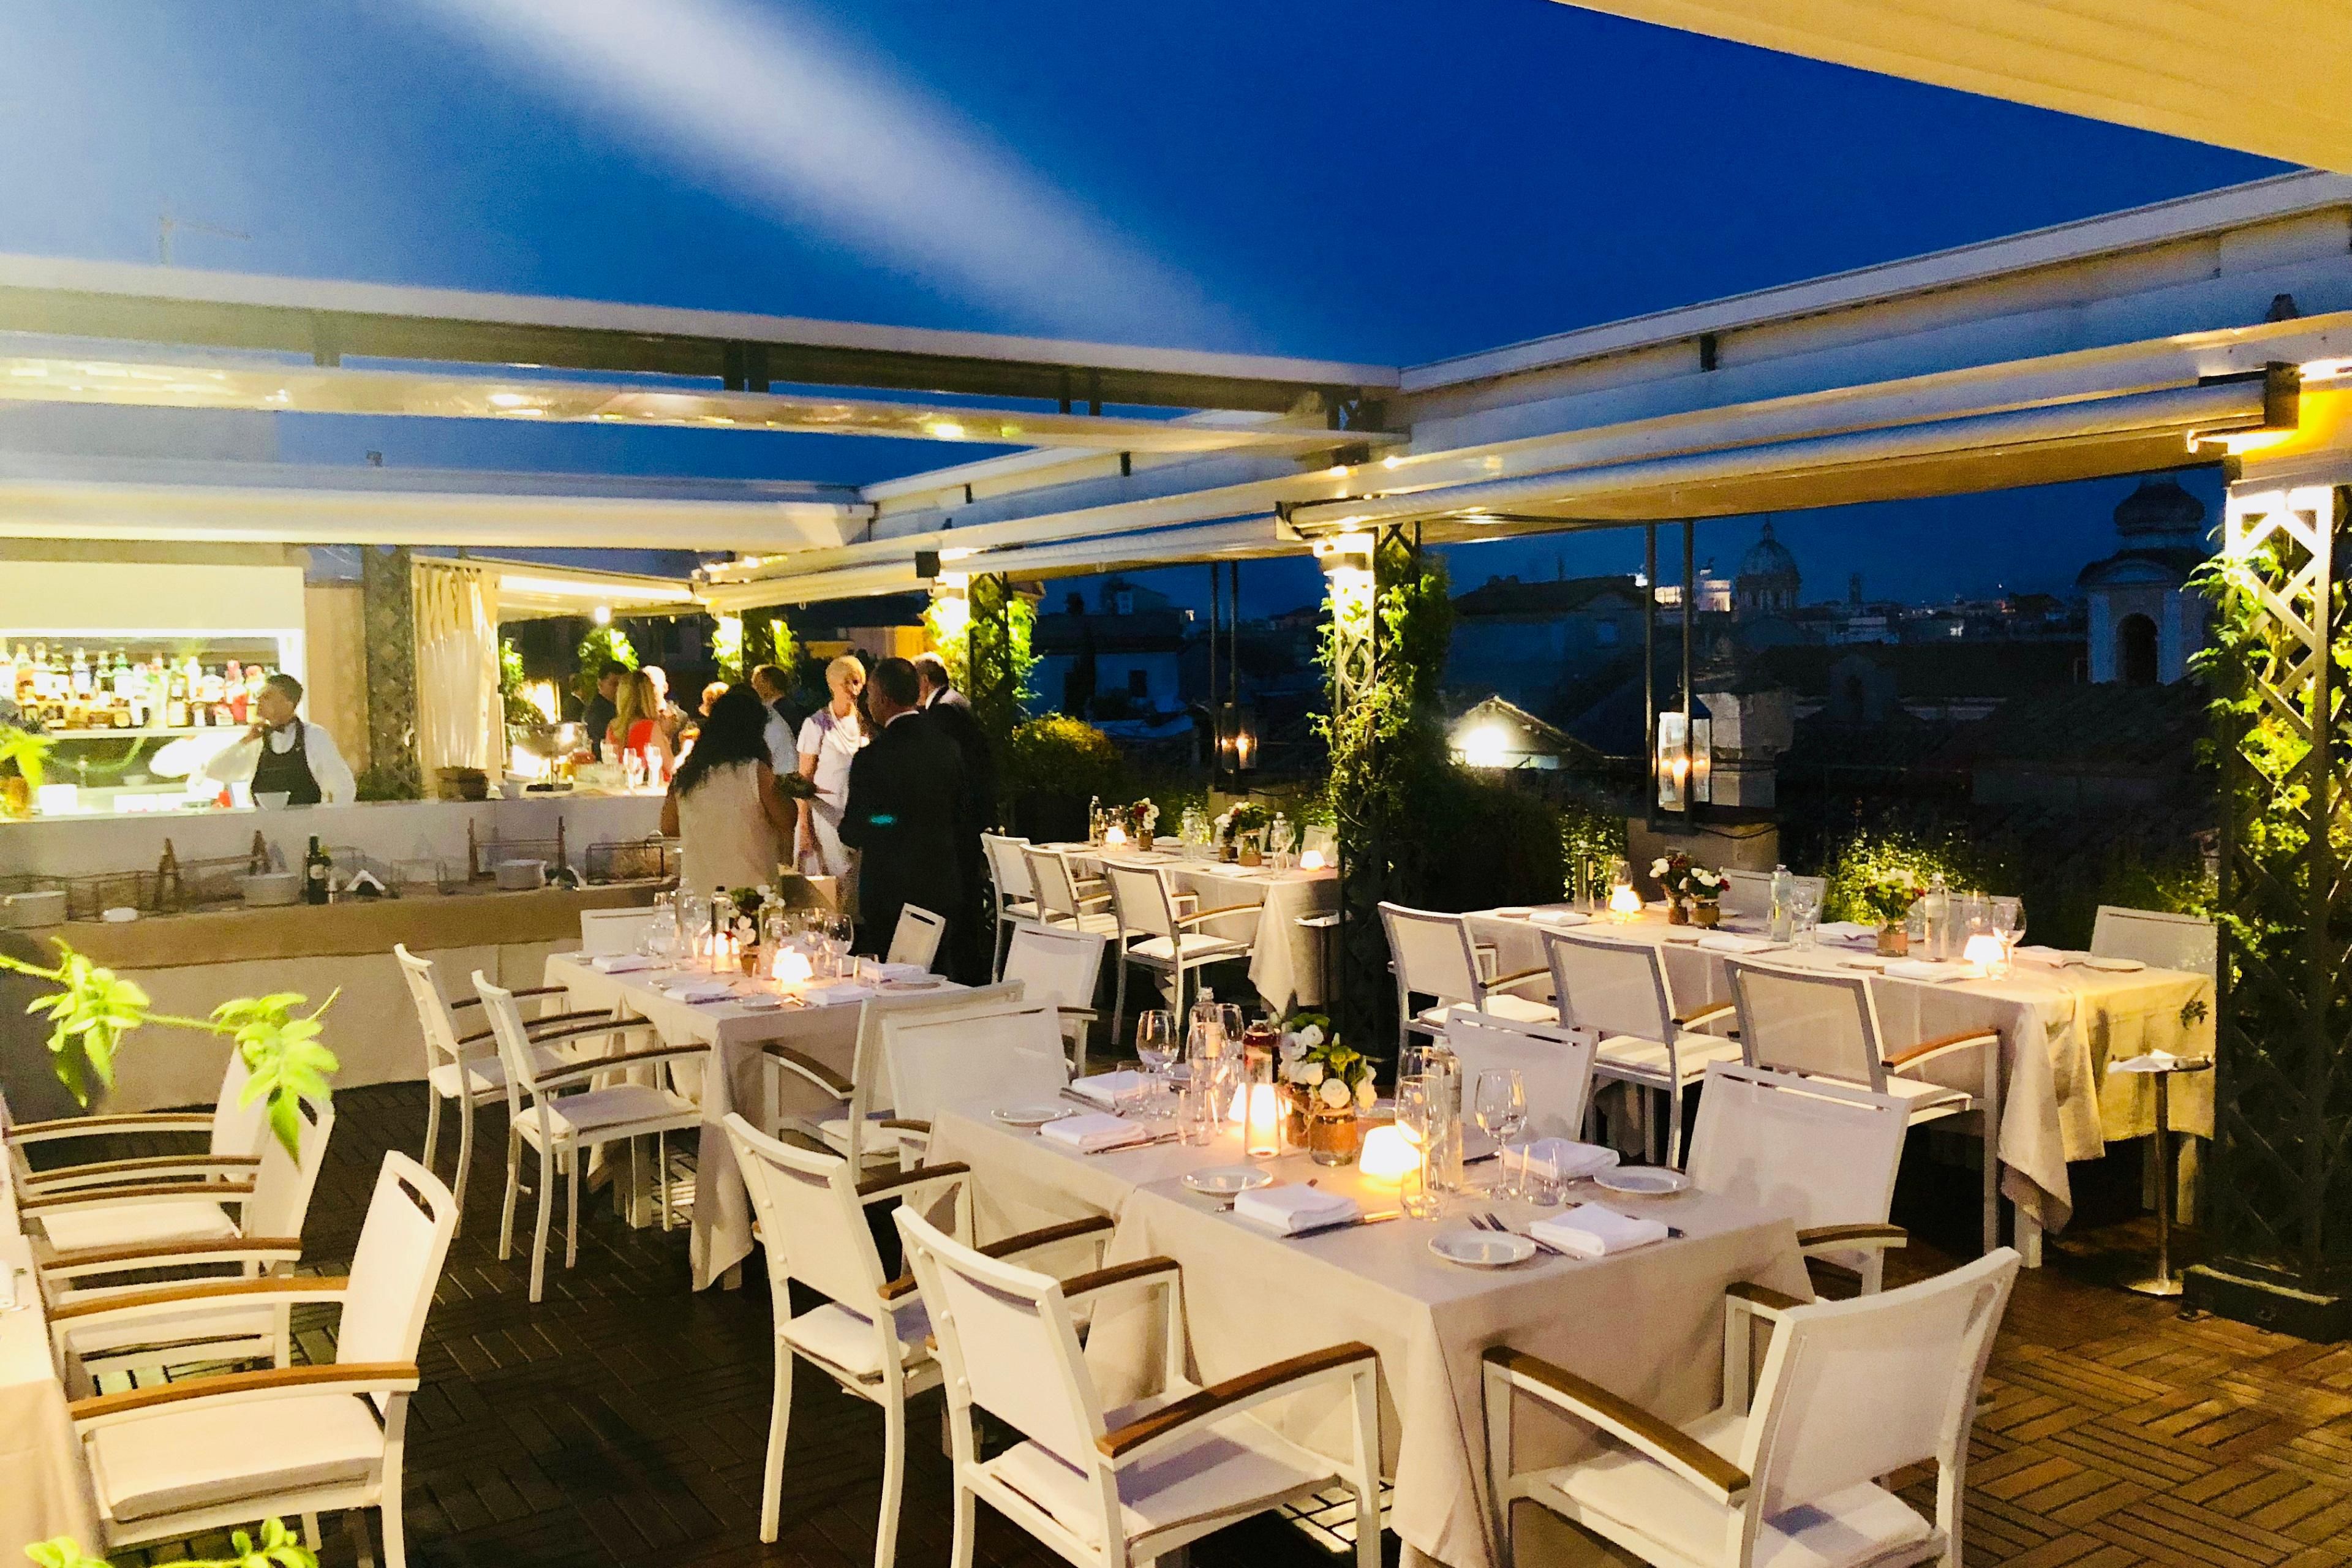 Our restaurant offers original solutions and flexible spaces for any event, whether it be a special occasion celebration, a gala dinner, or a business lunch. In summer, the amazing outdoor spaces such as the internal courtyard, mezzanine terrace, and roof terrace offer the opportunity to enjoy the amazing views of Rome.